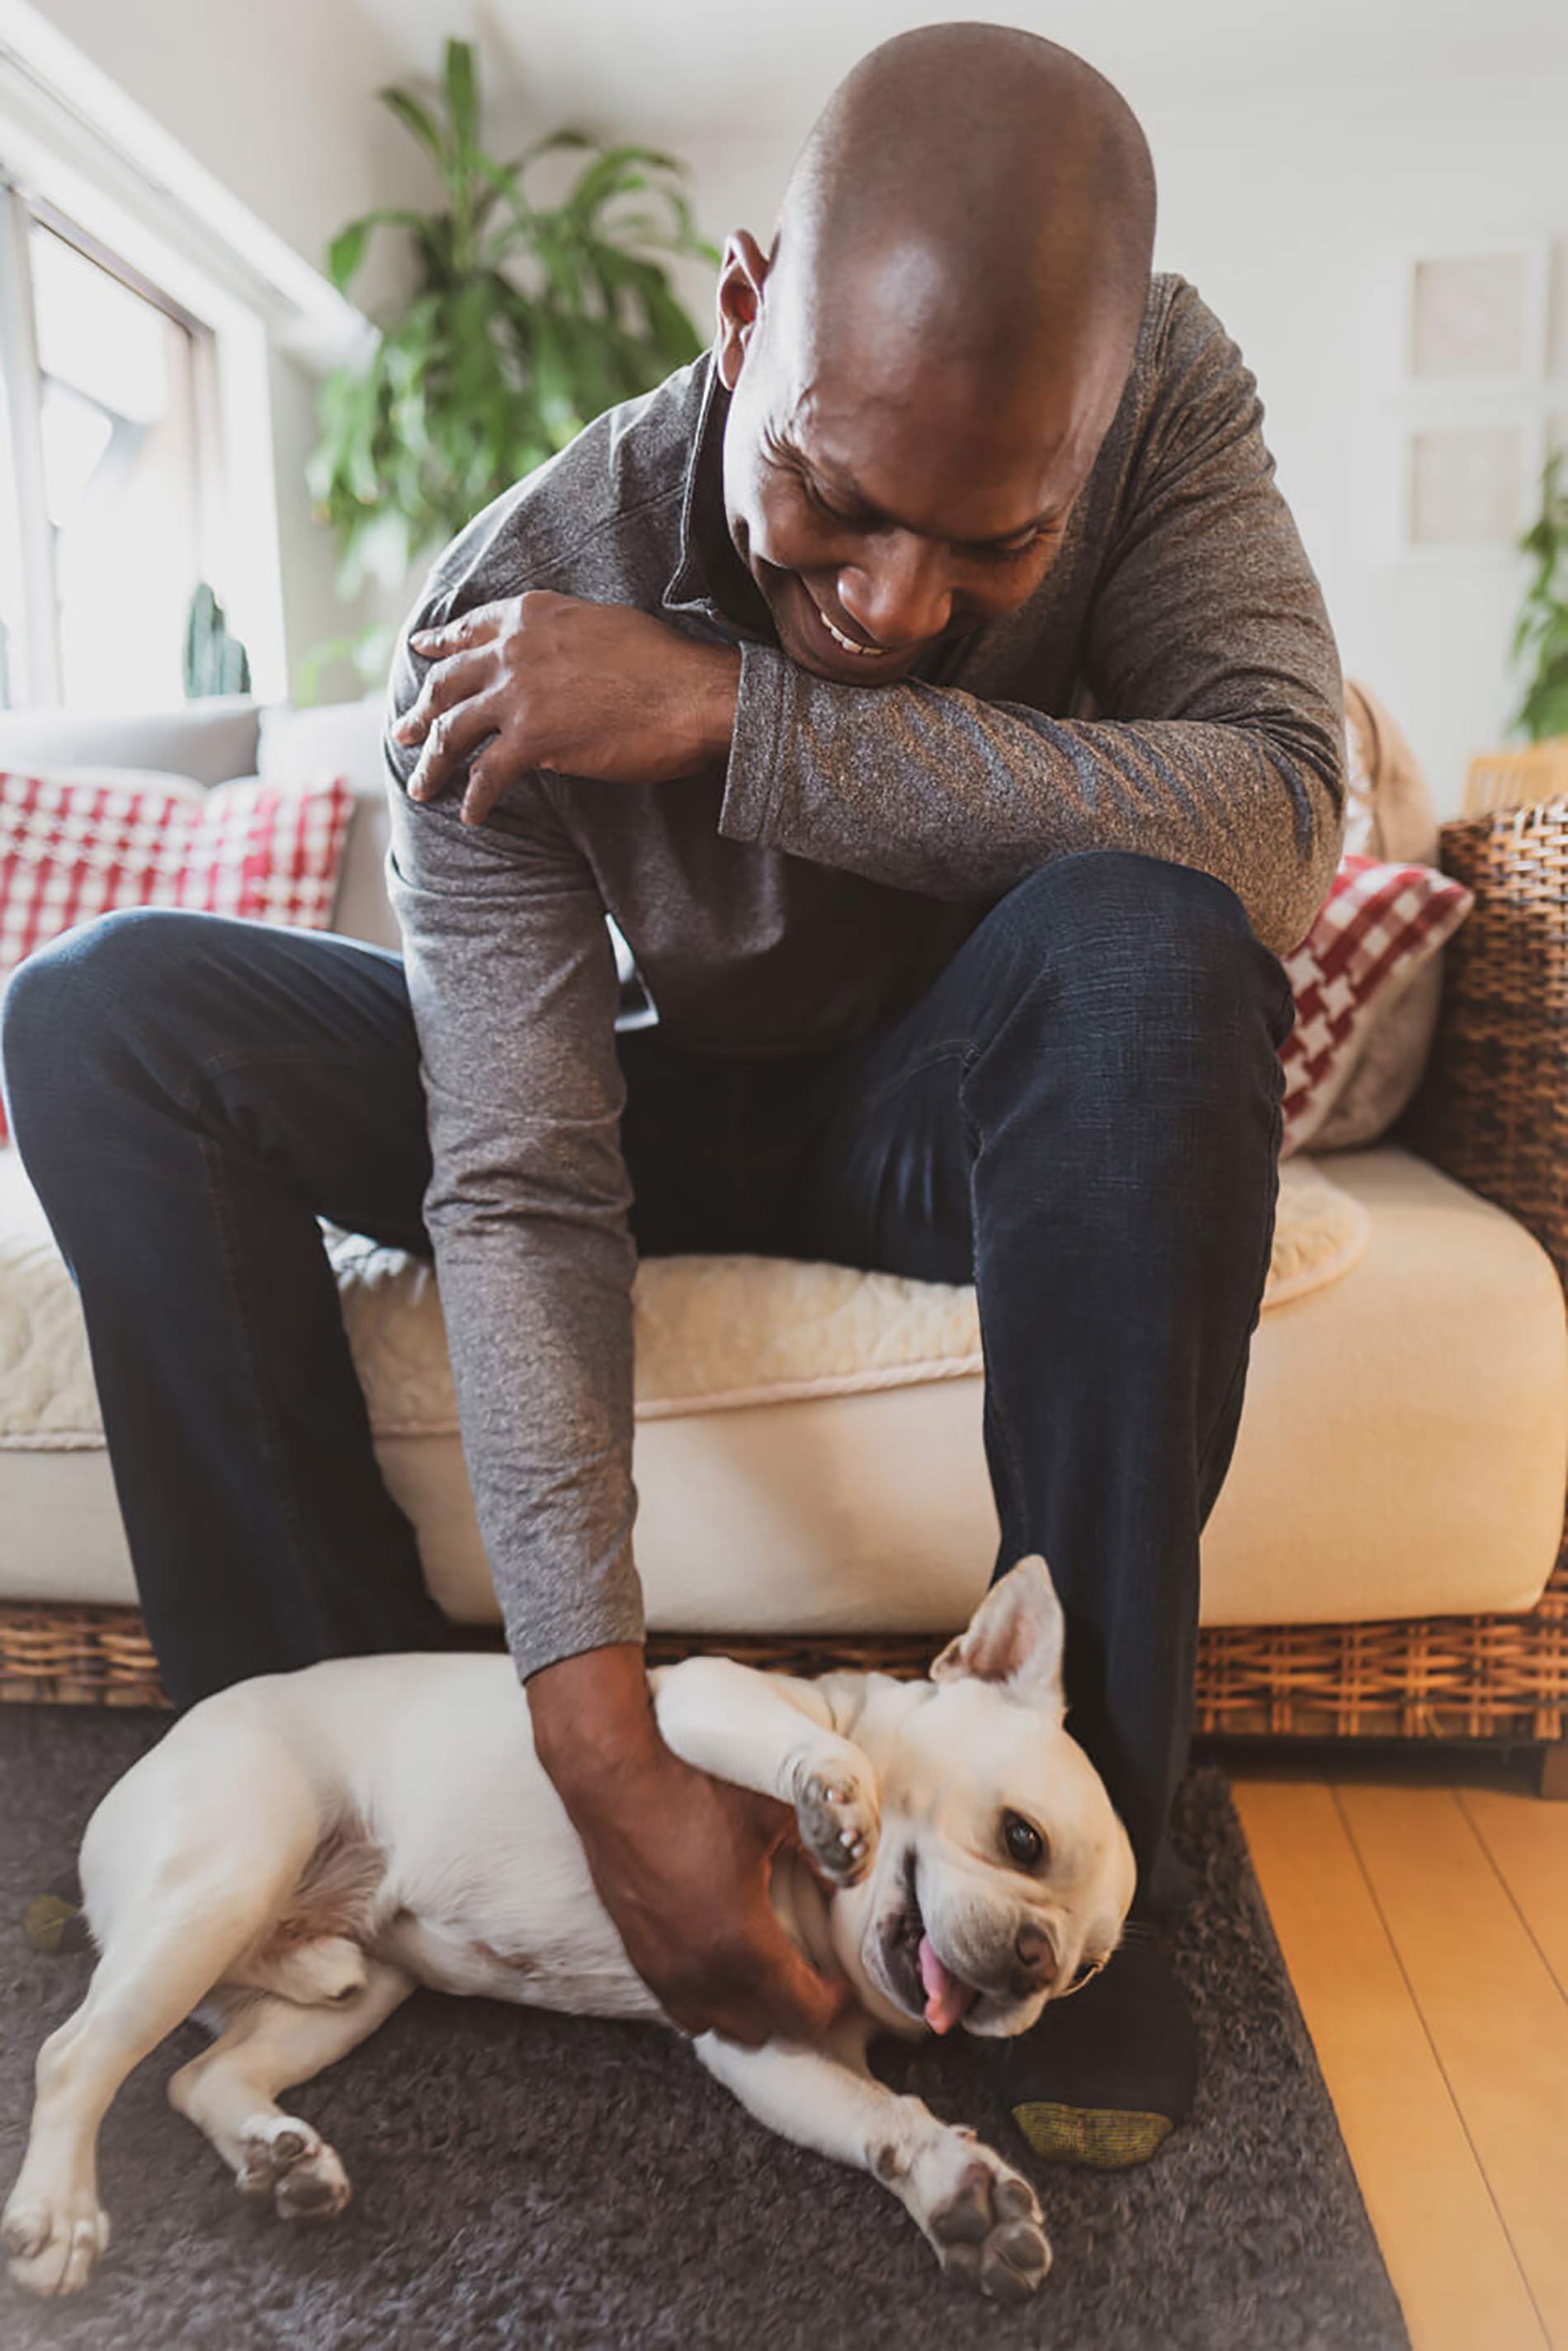 Man petting dog next to couch